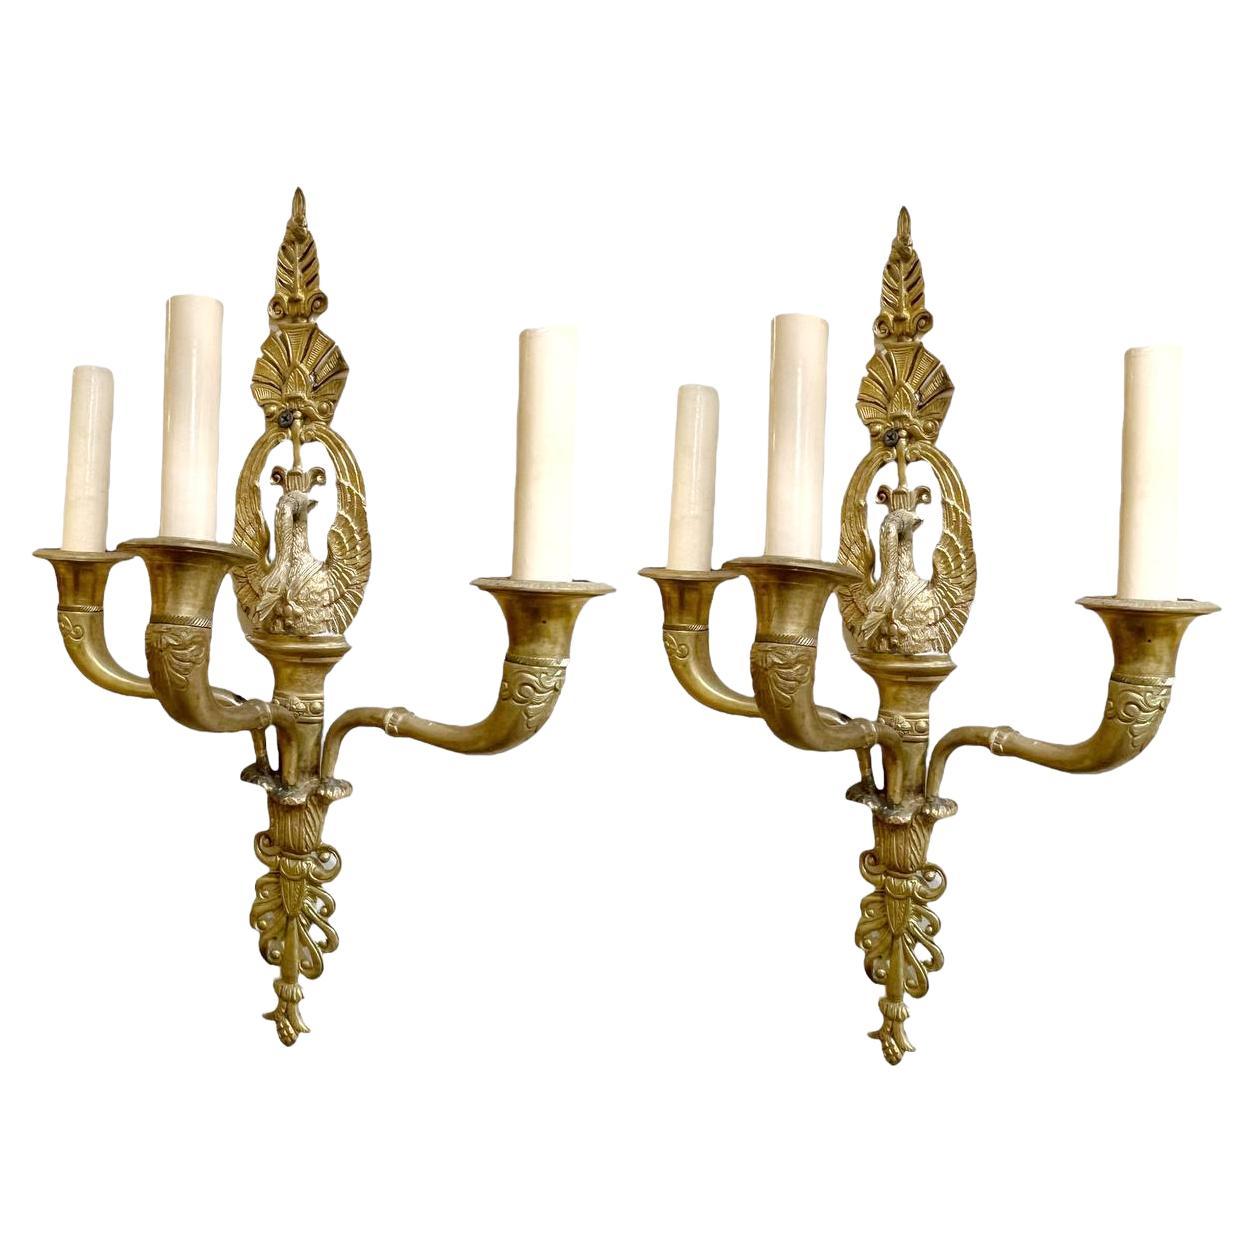 1900's French Empire Sconces With Swans three lights For Sale